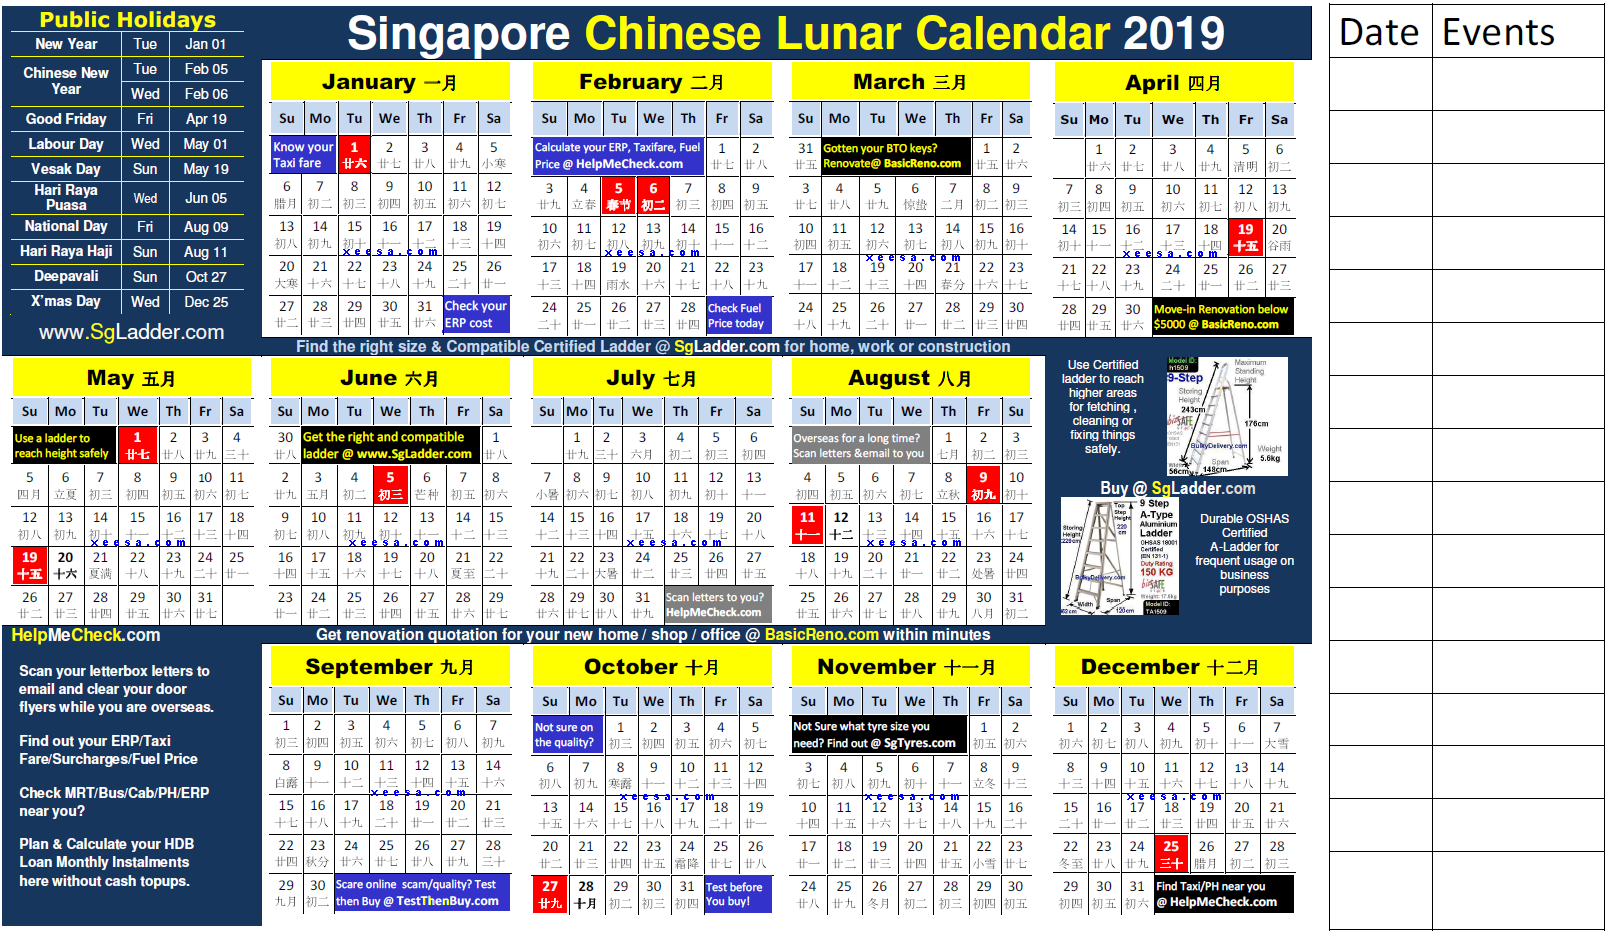 chinese all about: Chinese Lunar Calendar 2019 Free for Singapore